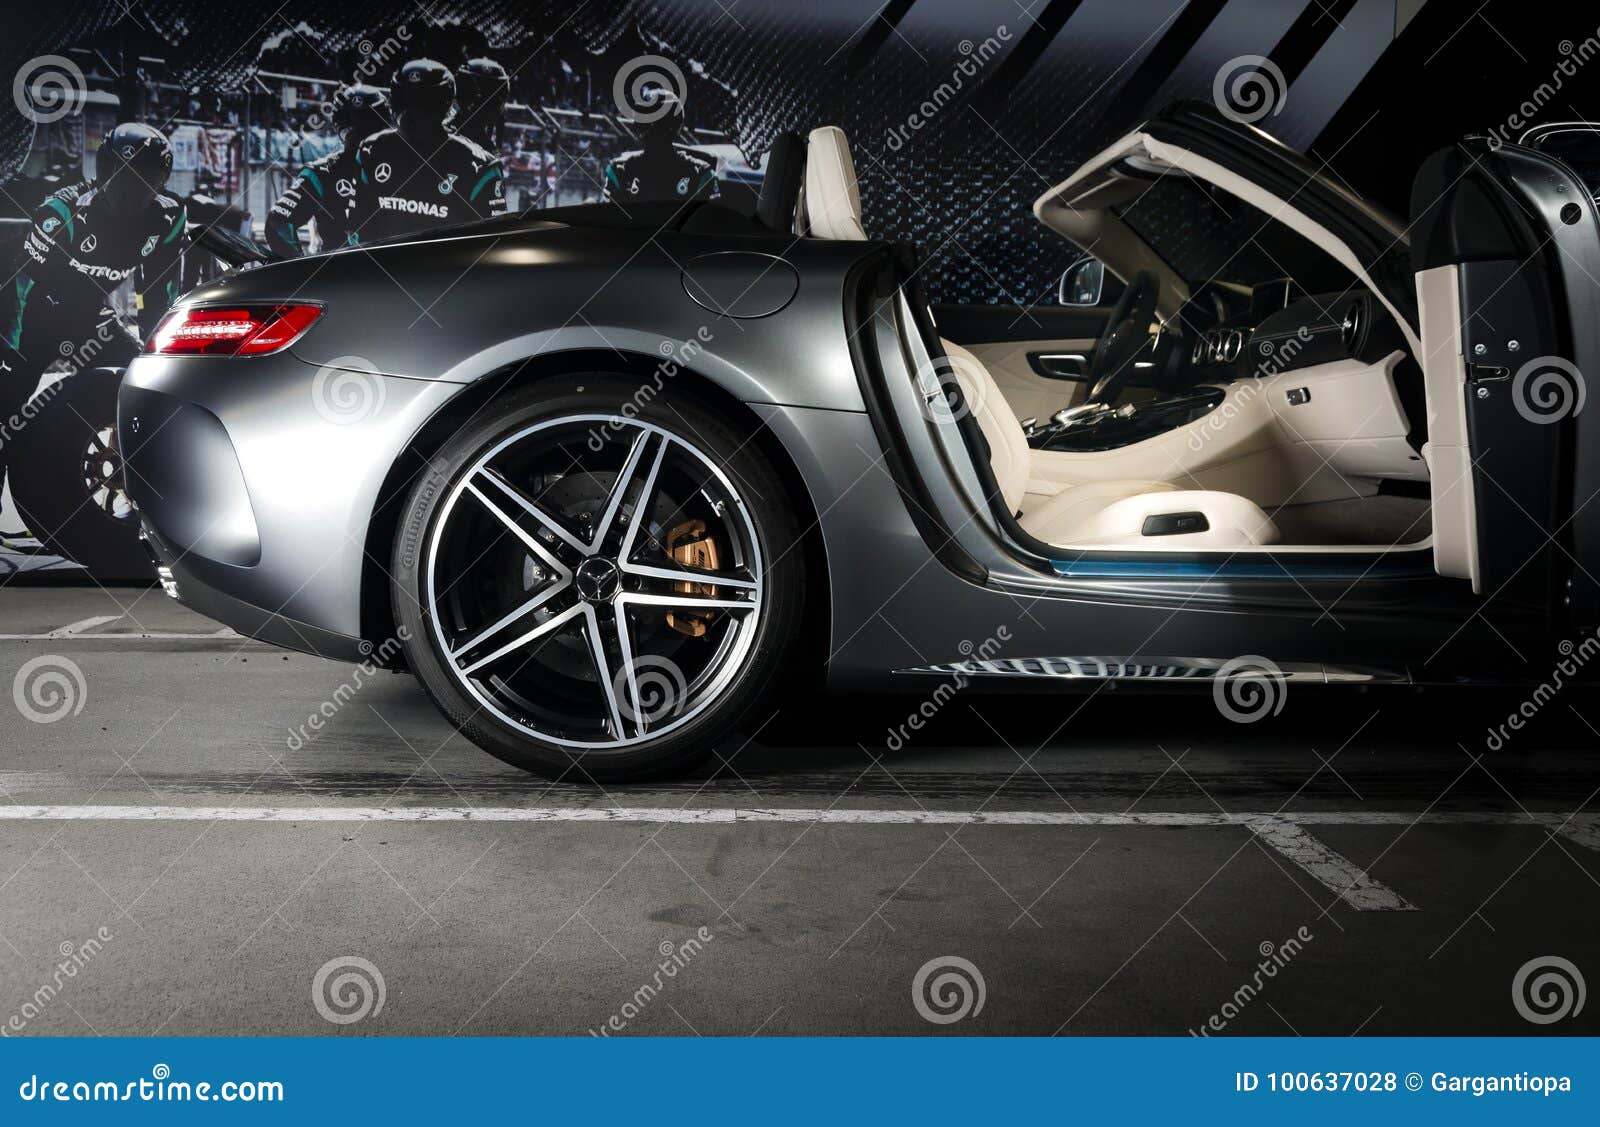 Mercedes Benz Gt C Amg 6 3 Exterior Details Race Wheel And